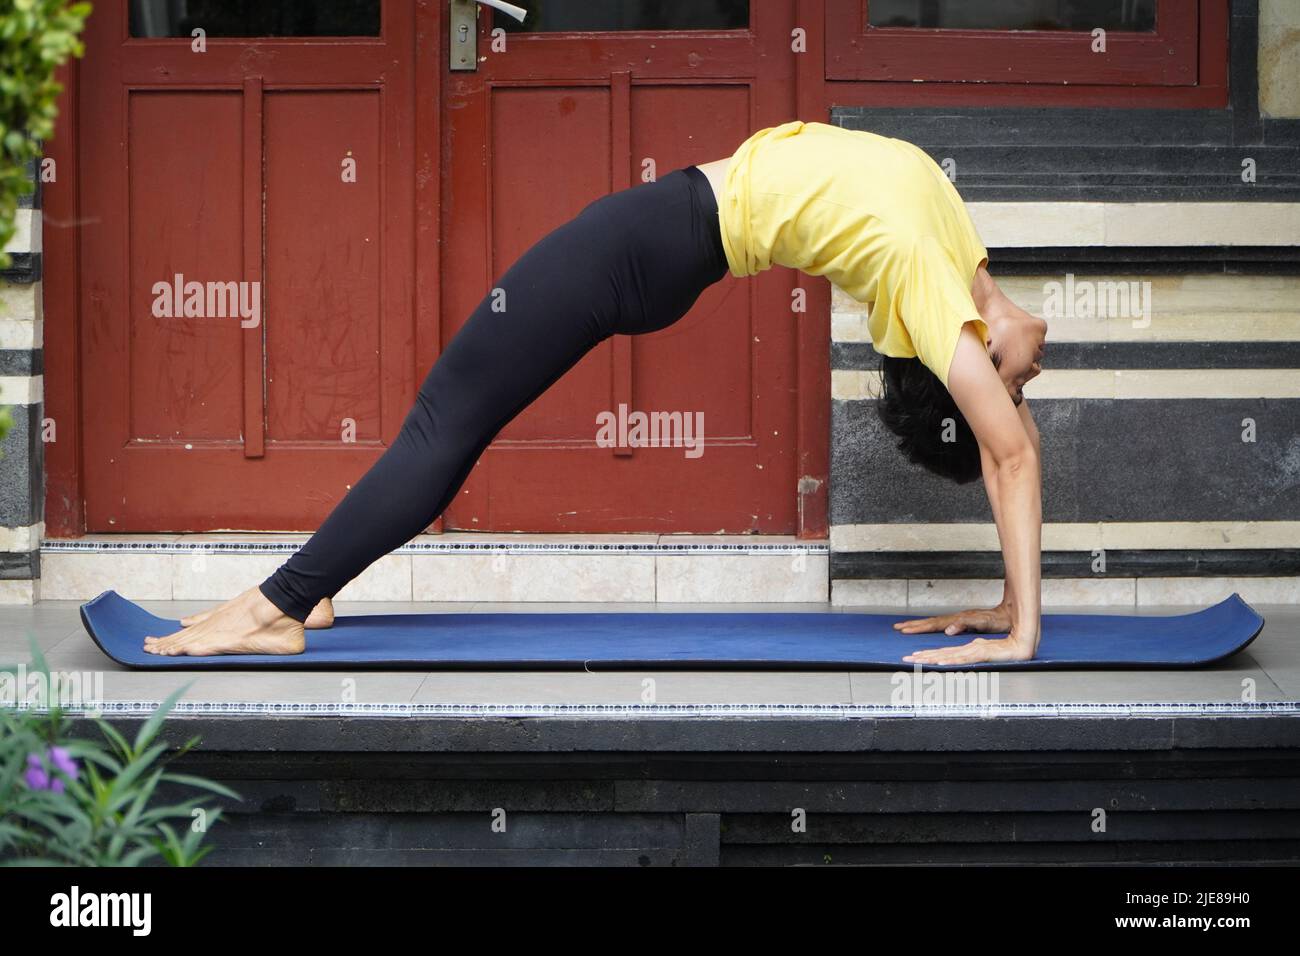 On his terrace, a young Asian girl with a stunning appearance is practicing Yoga while sporting a short haircut, a yellow shirt, and black leggings. S Stock Photo